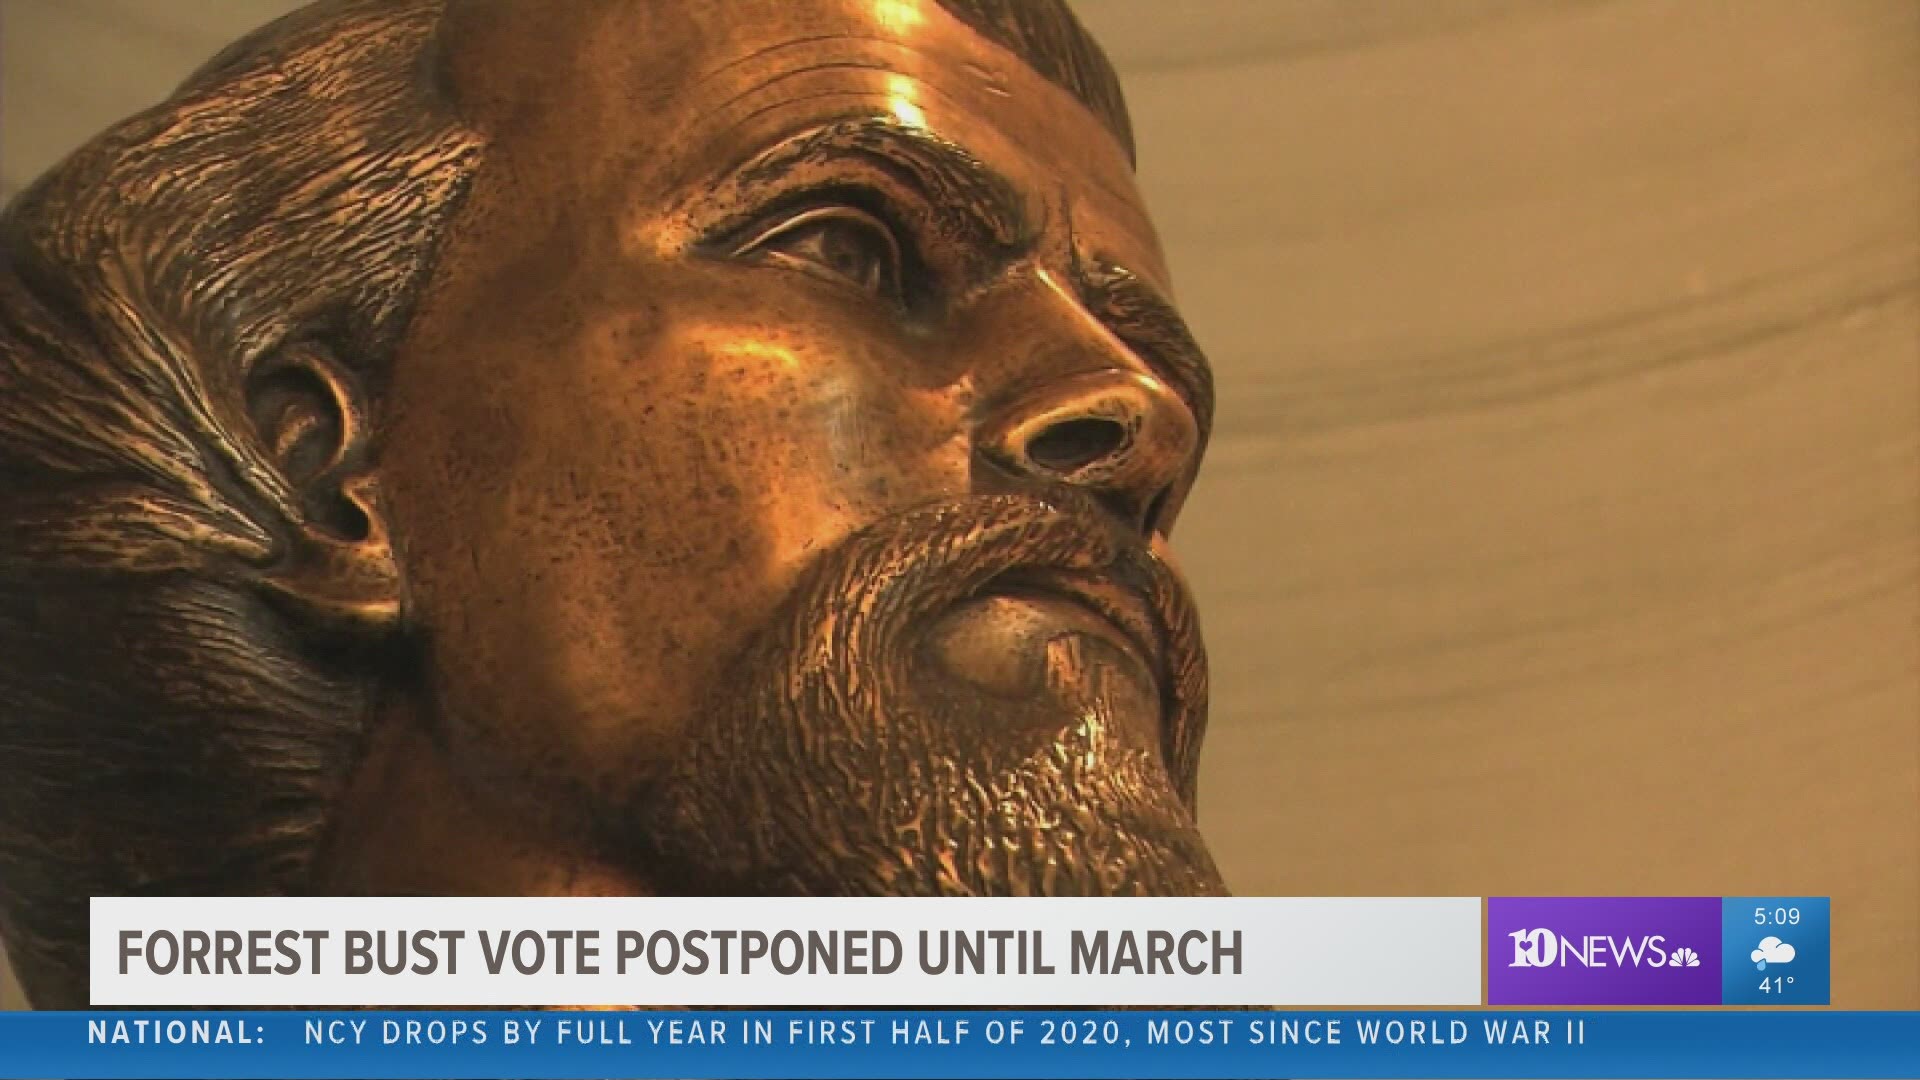 A commission meeting to remove the Nathan Bedford Forrest bust from the Capitol has been delayed until March.